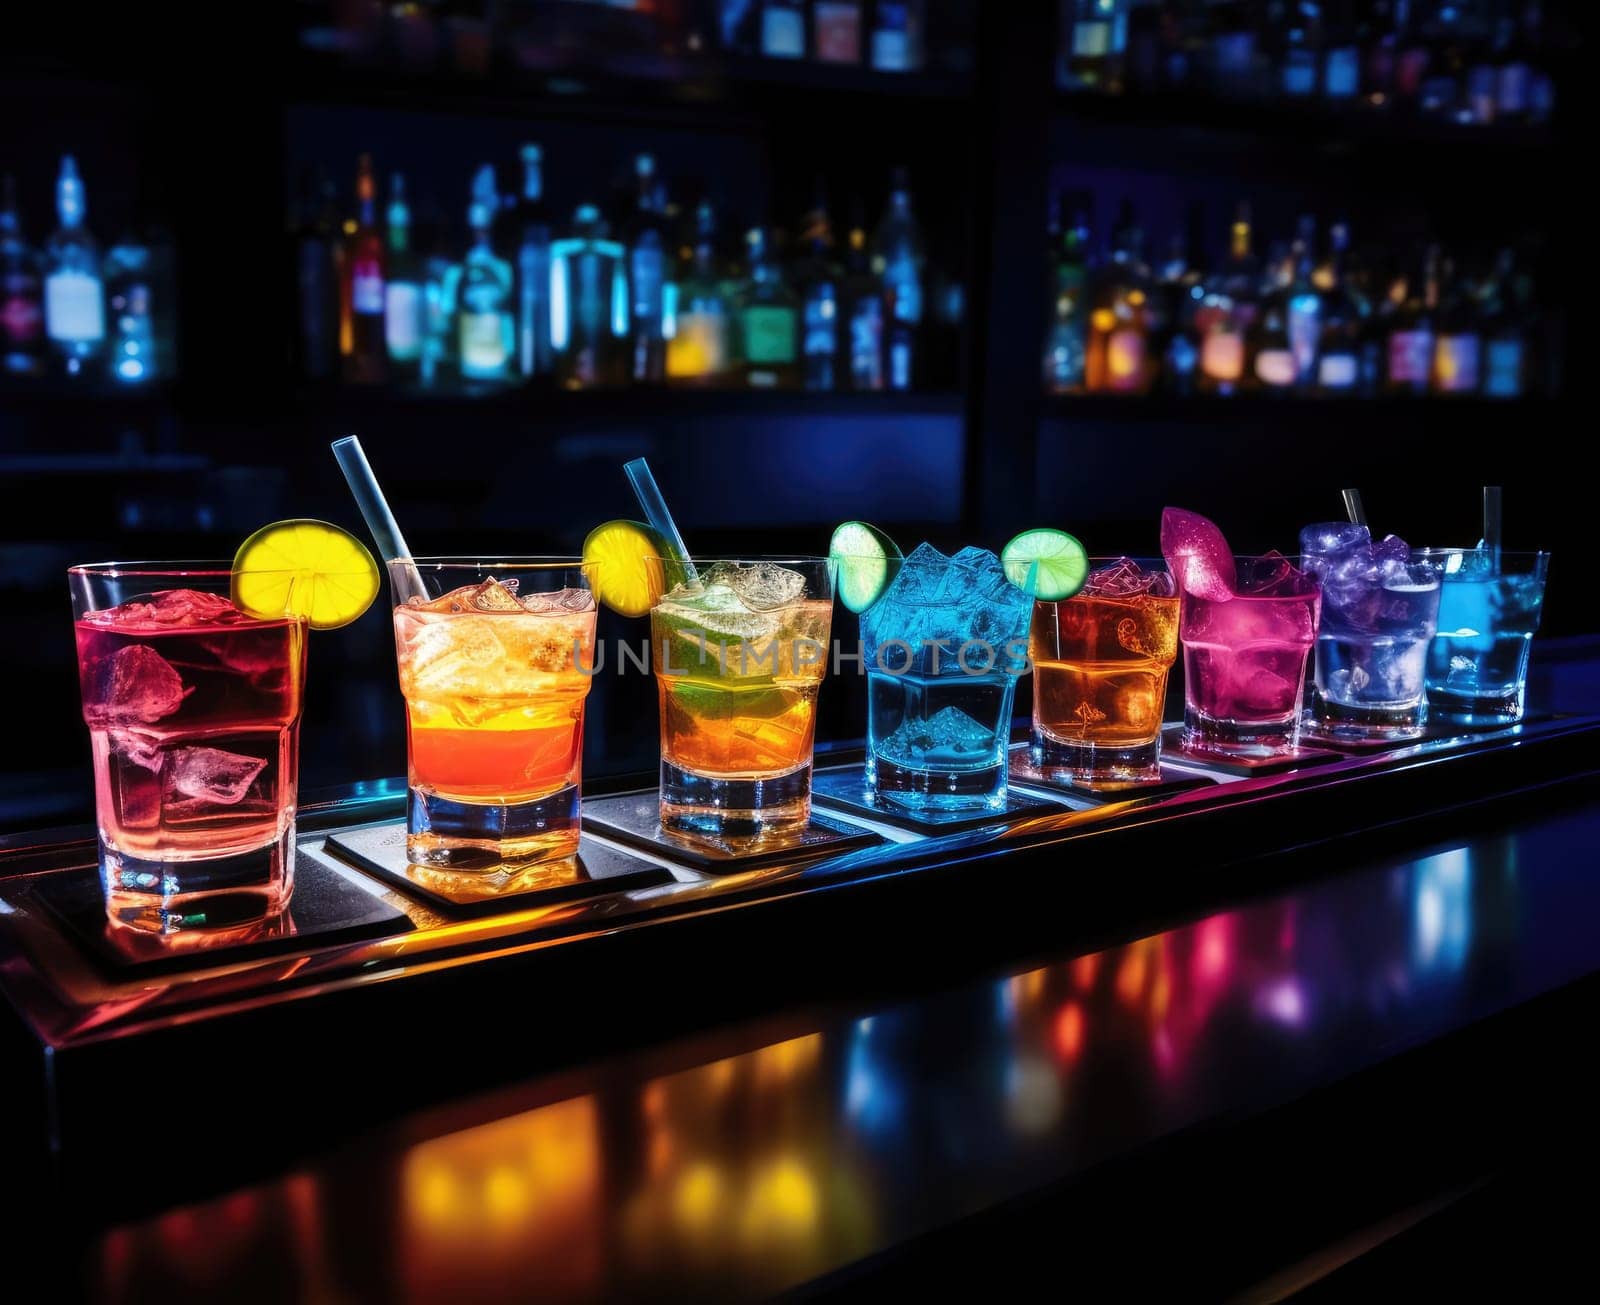 A few colorful cocktails on the bar. Nobody